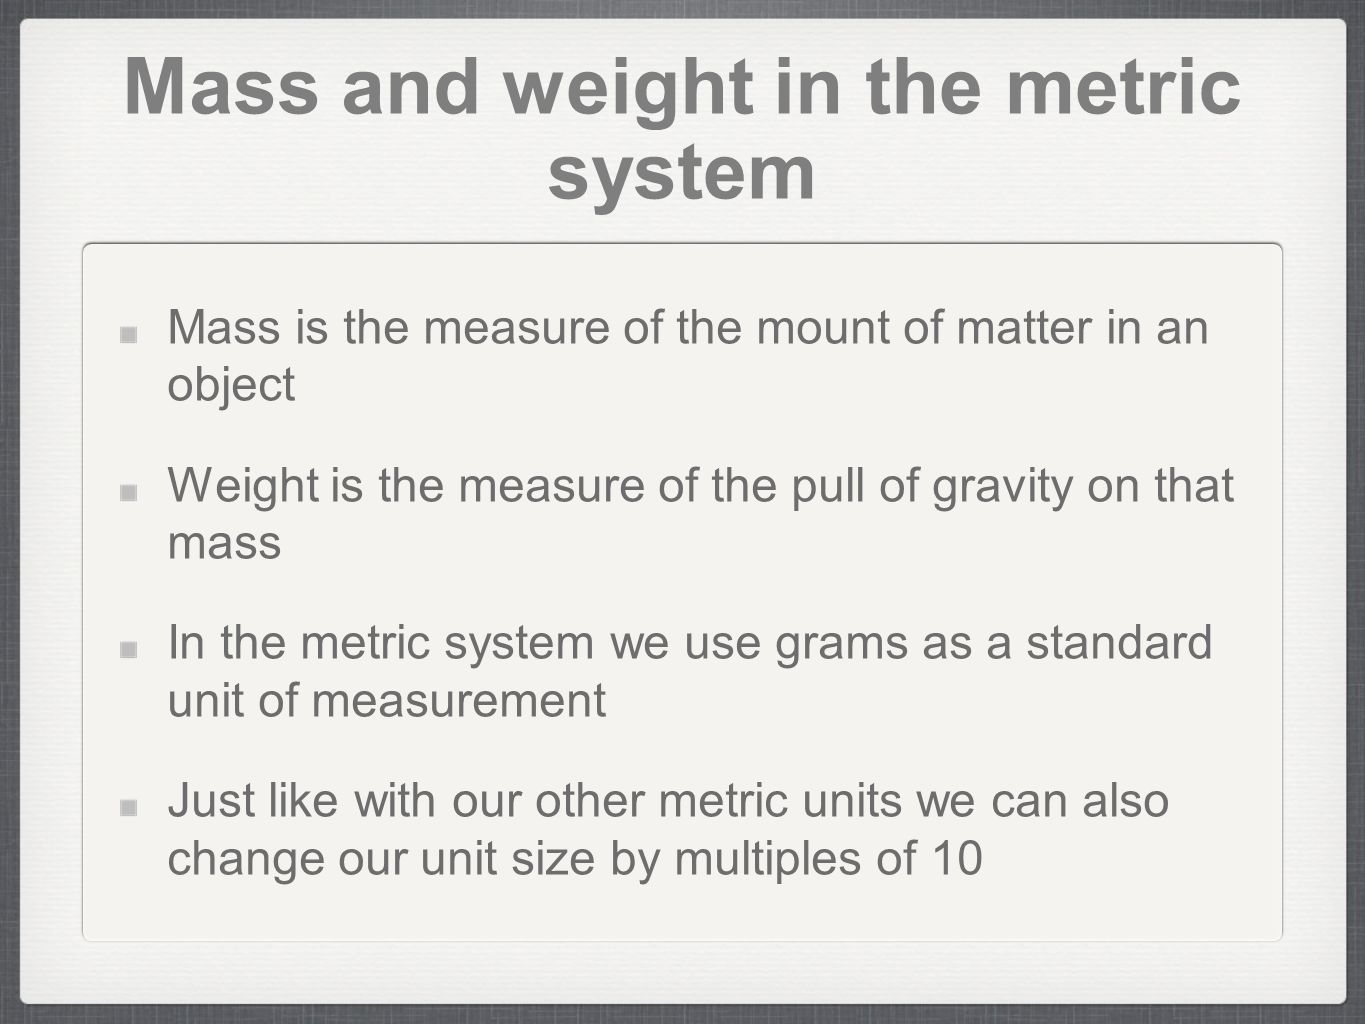 Mass and weight in the metric system